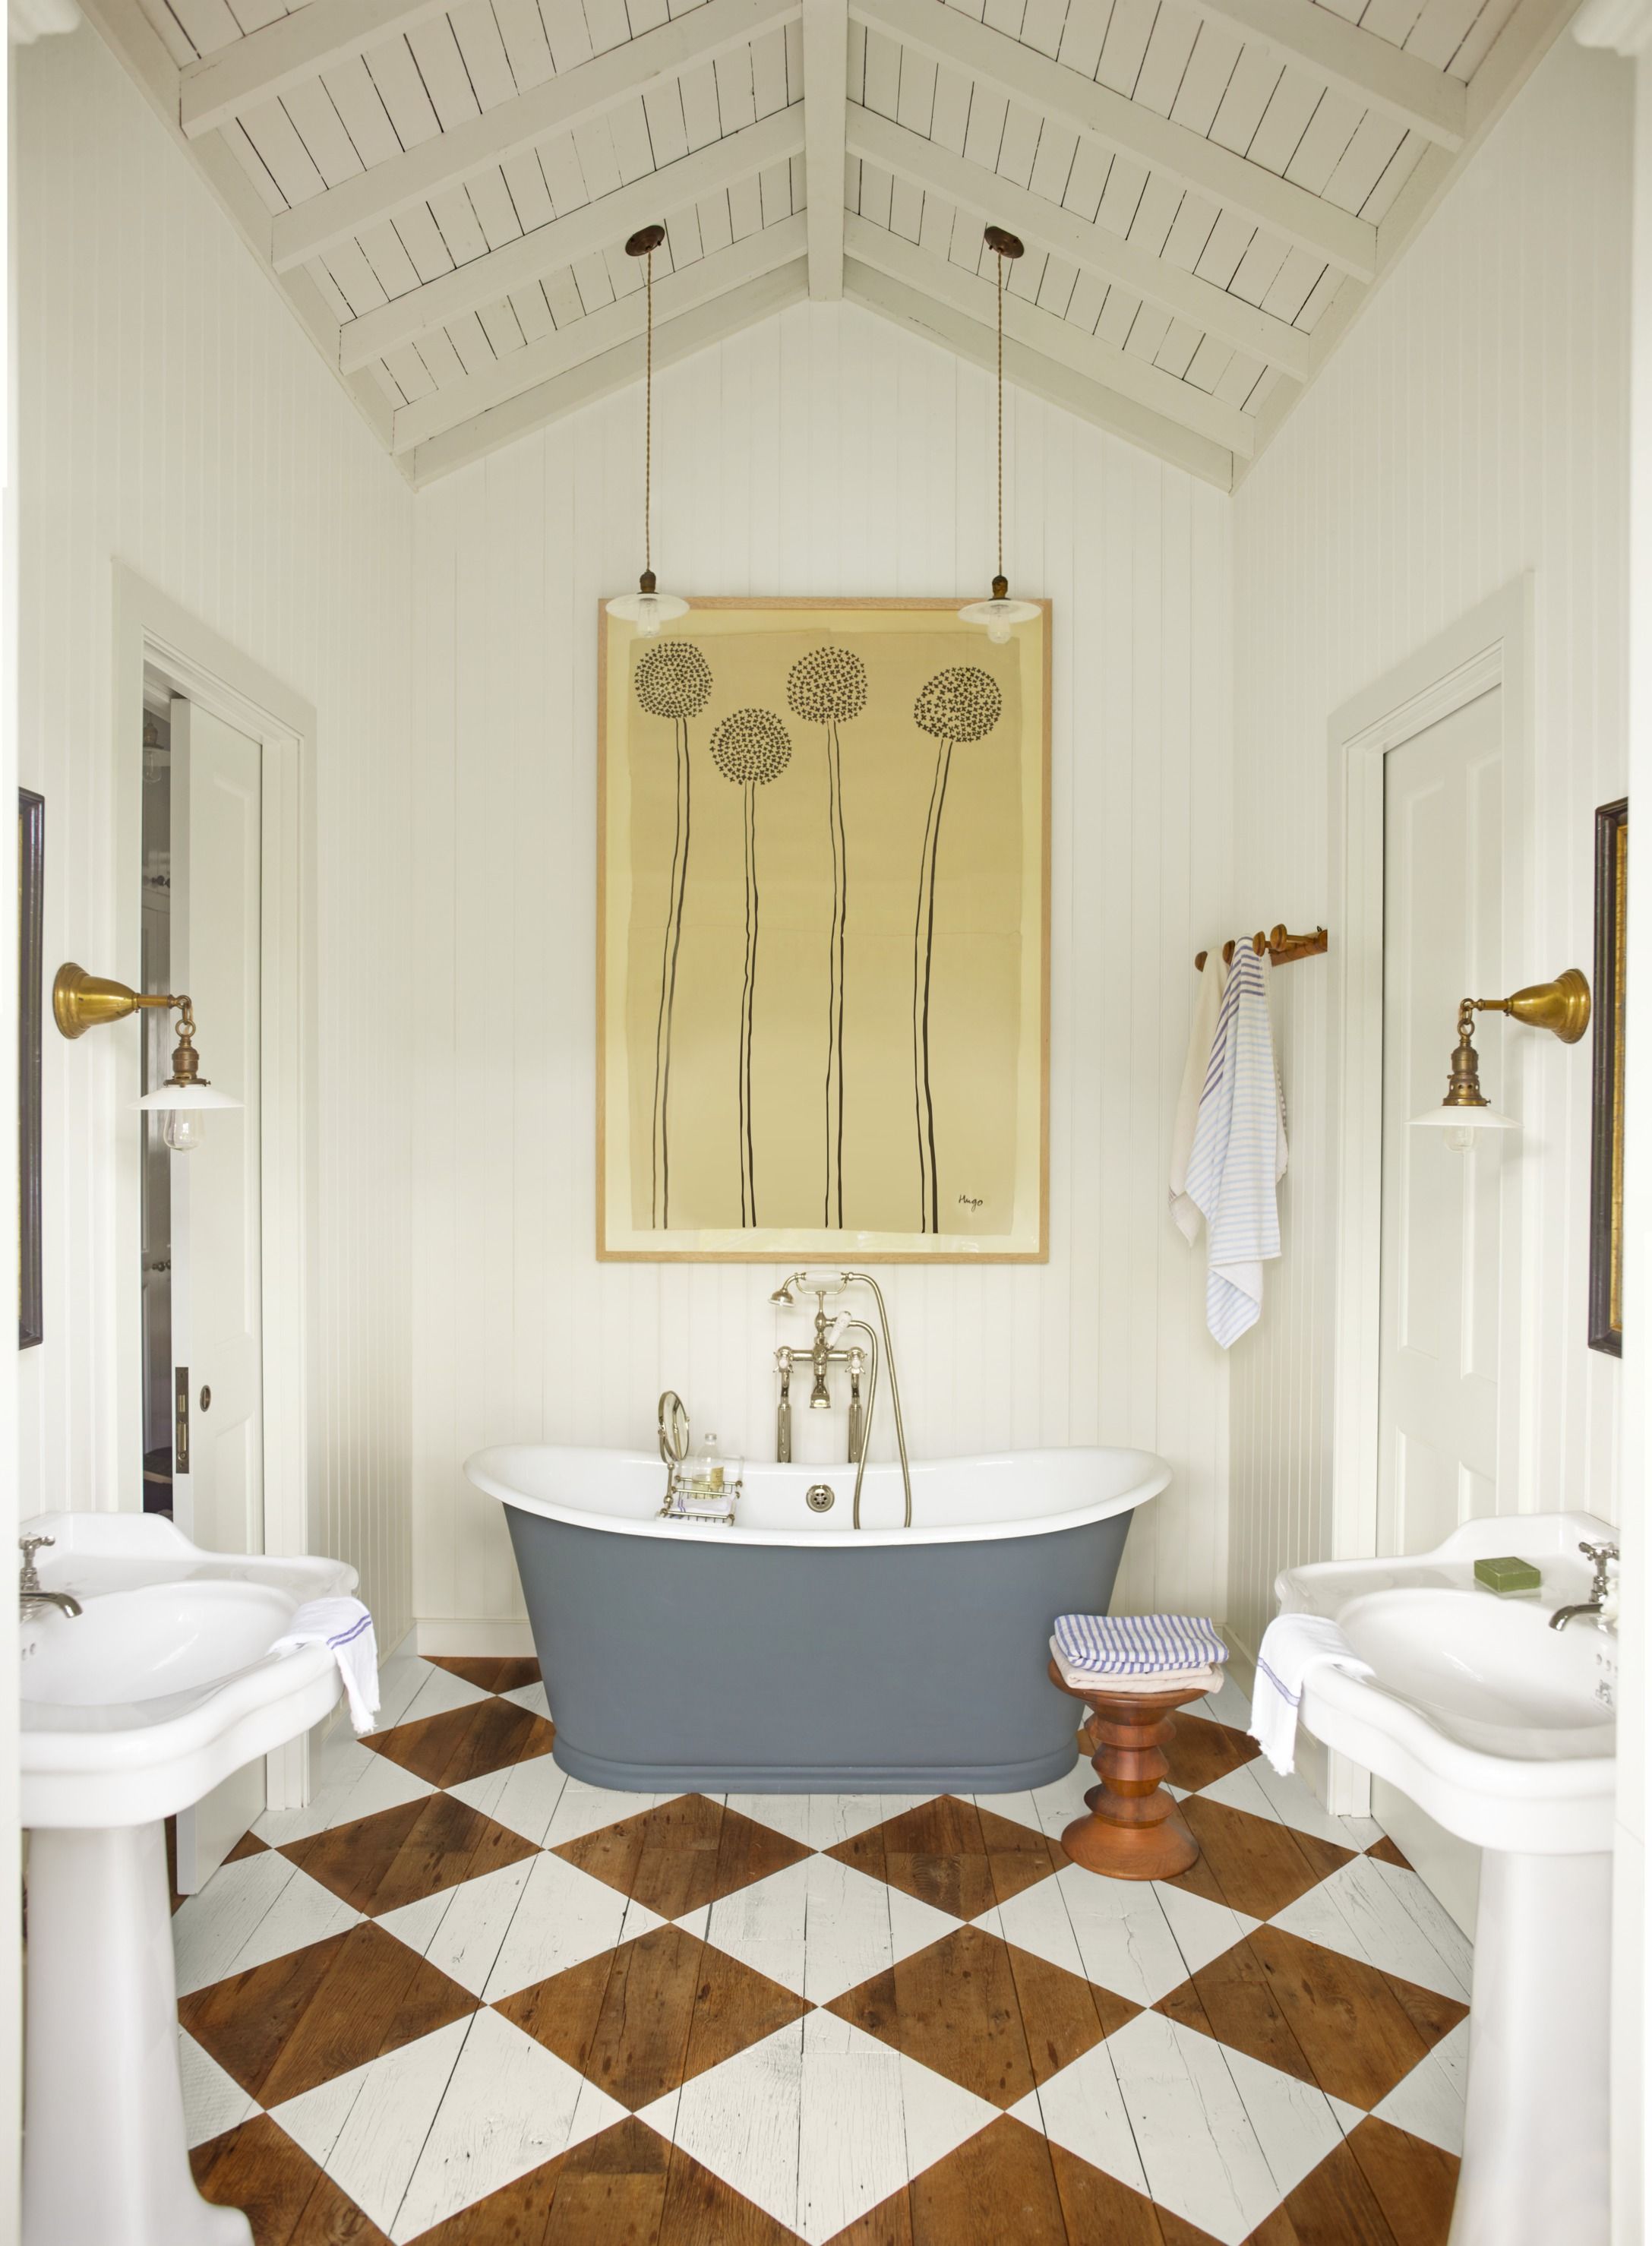 5 Luxury Bathroom Decor Ideas You Will Need For 2020 - Covet Edition